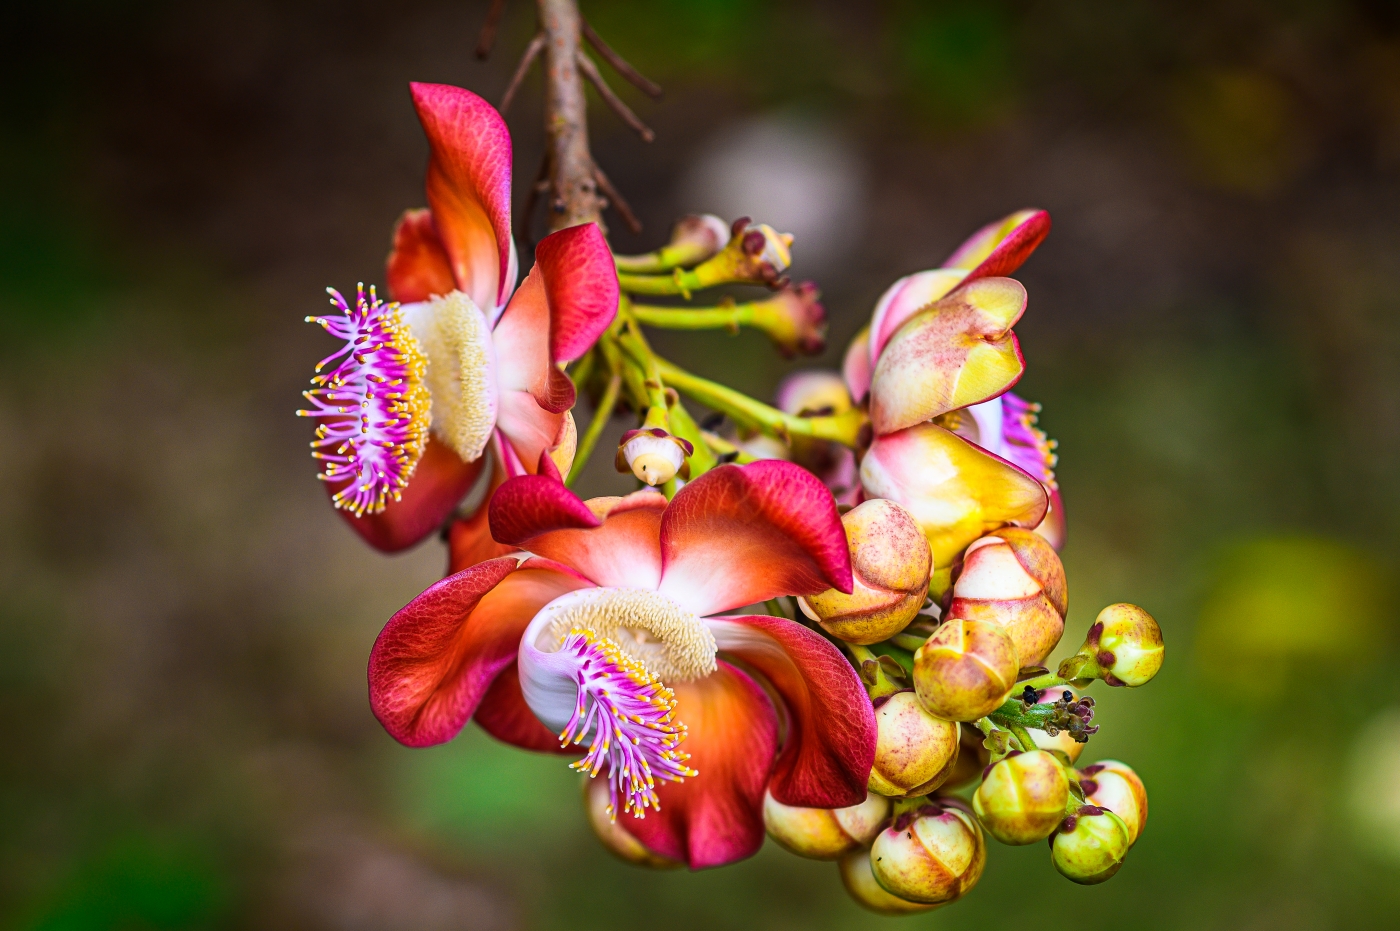 Cannon Ball Tree Flower - ST. Croix by Peter Rossato